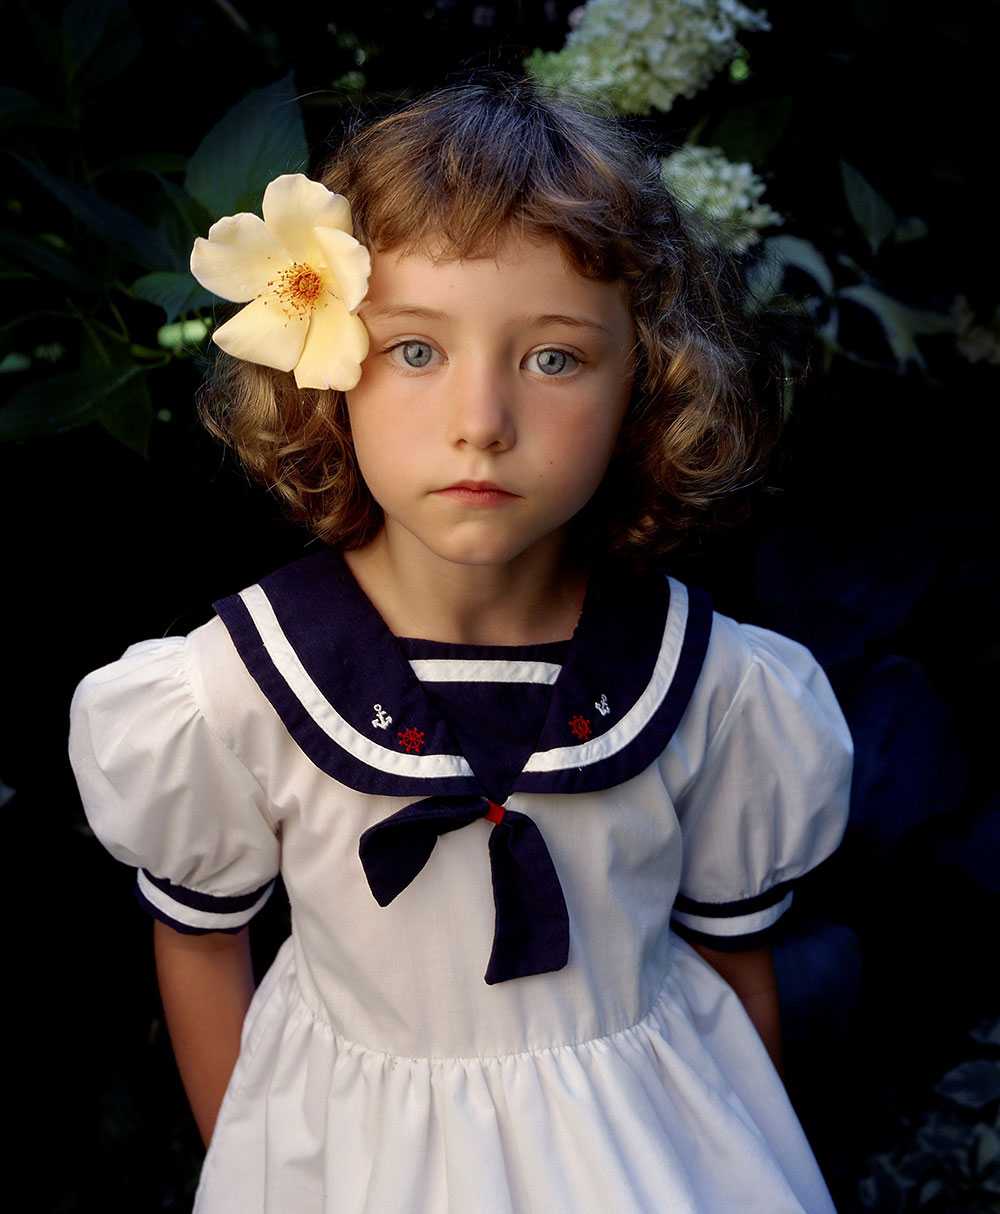 A young girl in a sailor dress looks up to the camera with a blossom tucked behind her ear.